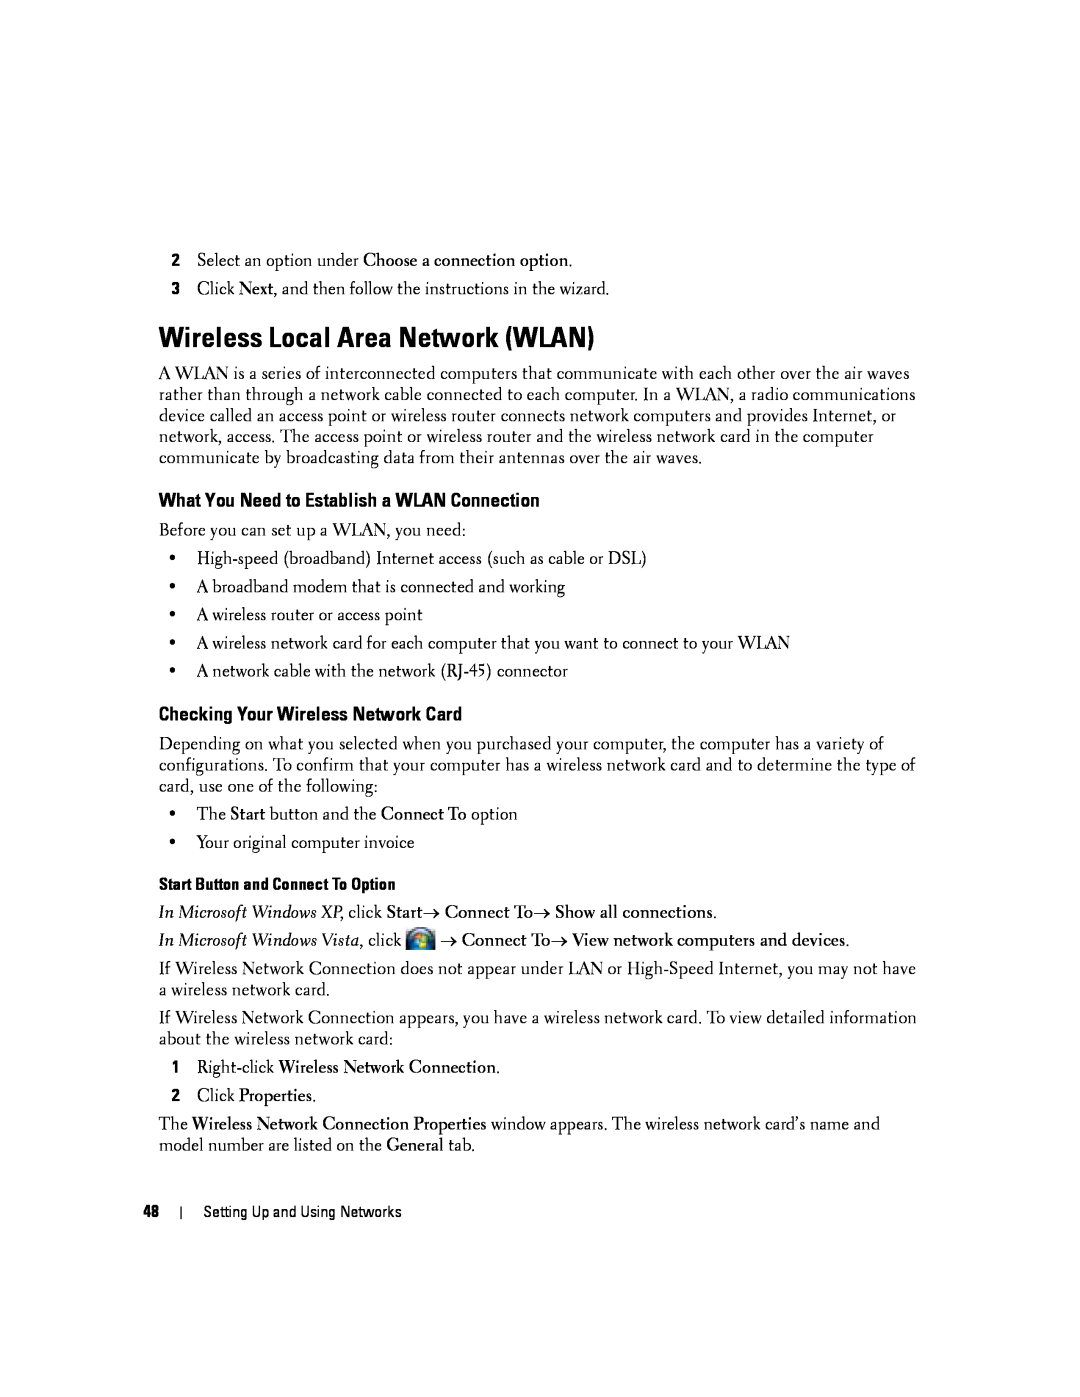 Dell PP04X, D830 manual Wireless Local Area Network WLAN, What You Need to Establish a WLAN Connection 